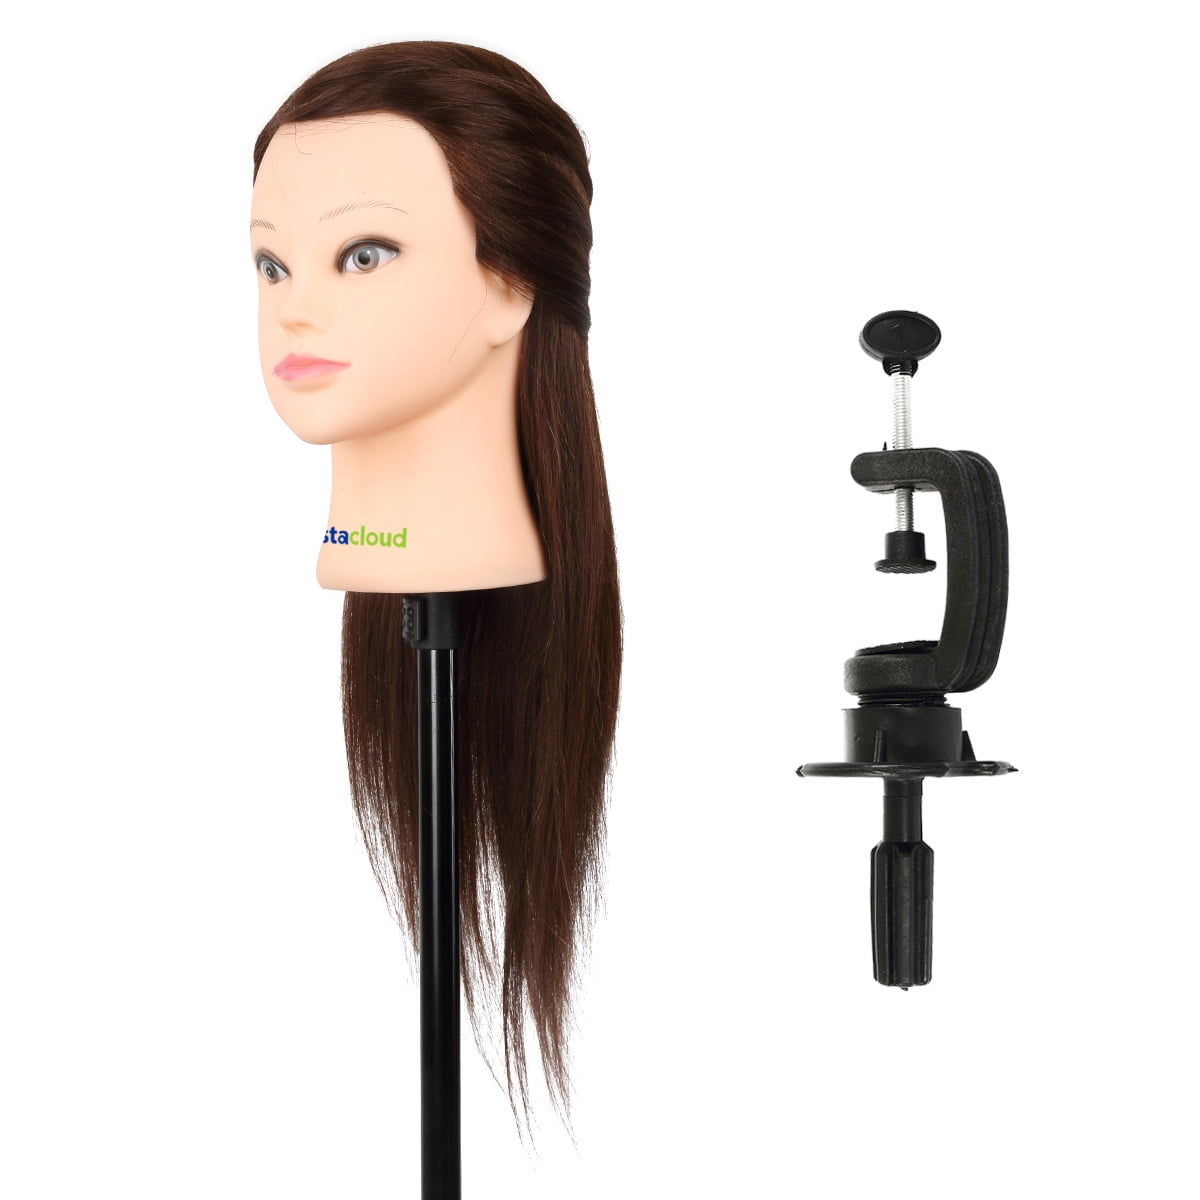 Mannequin Head 100% Human Hair with shoulders 24-26 Inch Female Doll  Manikin Training Head Styling Braiding with Stand Table Clamp for  Cosmetology